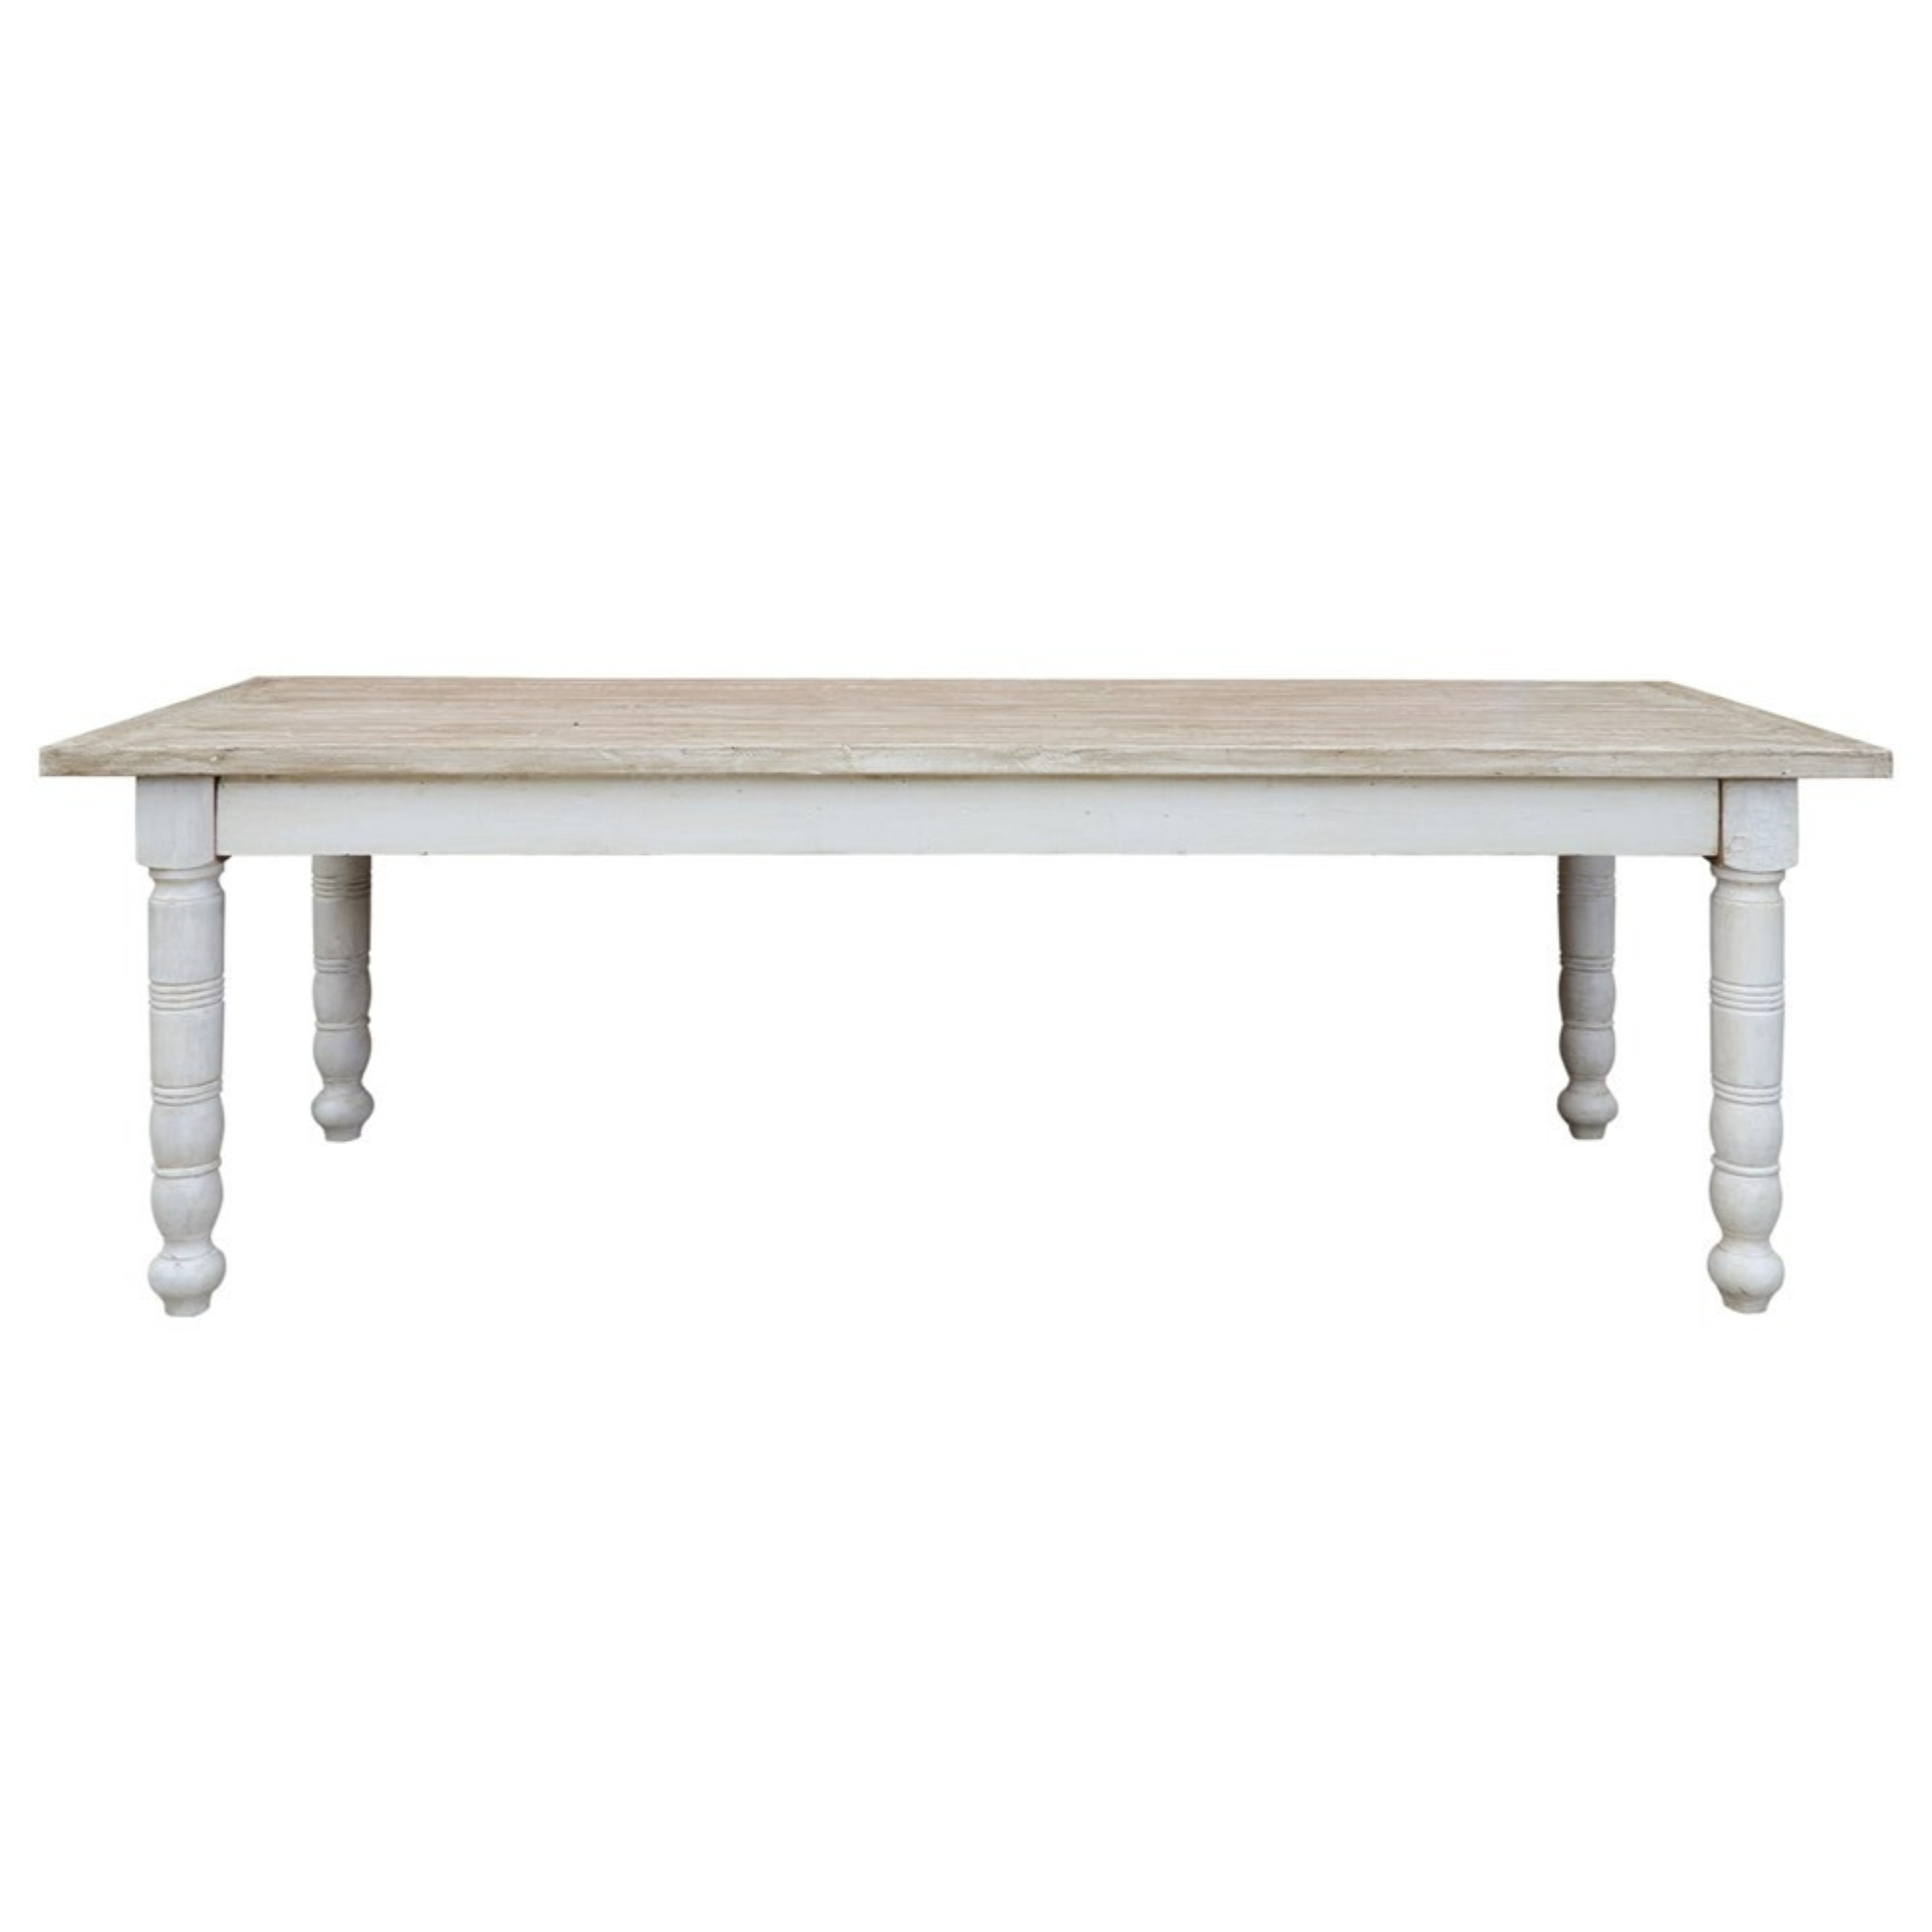 LIMITED EDITION RECLAIMED DINING TABLE